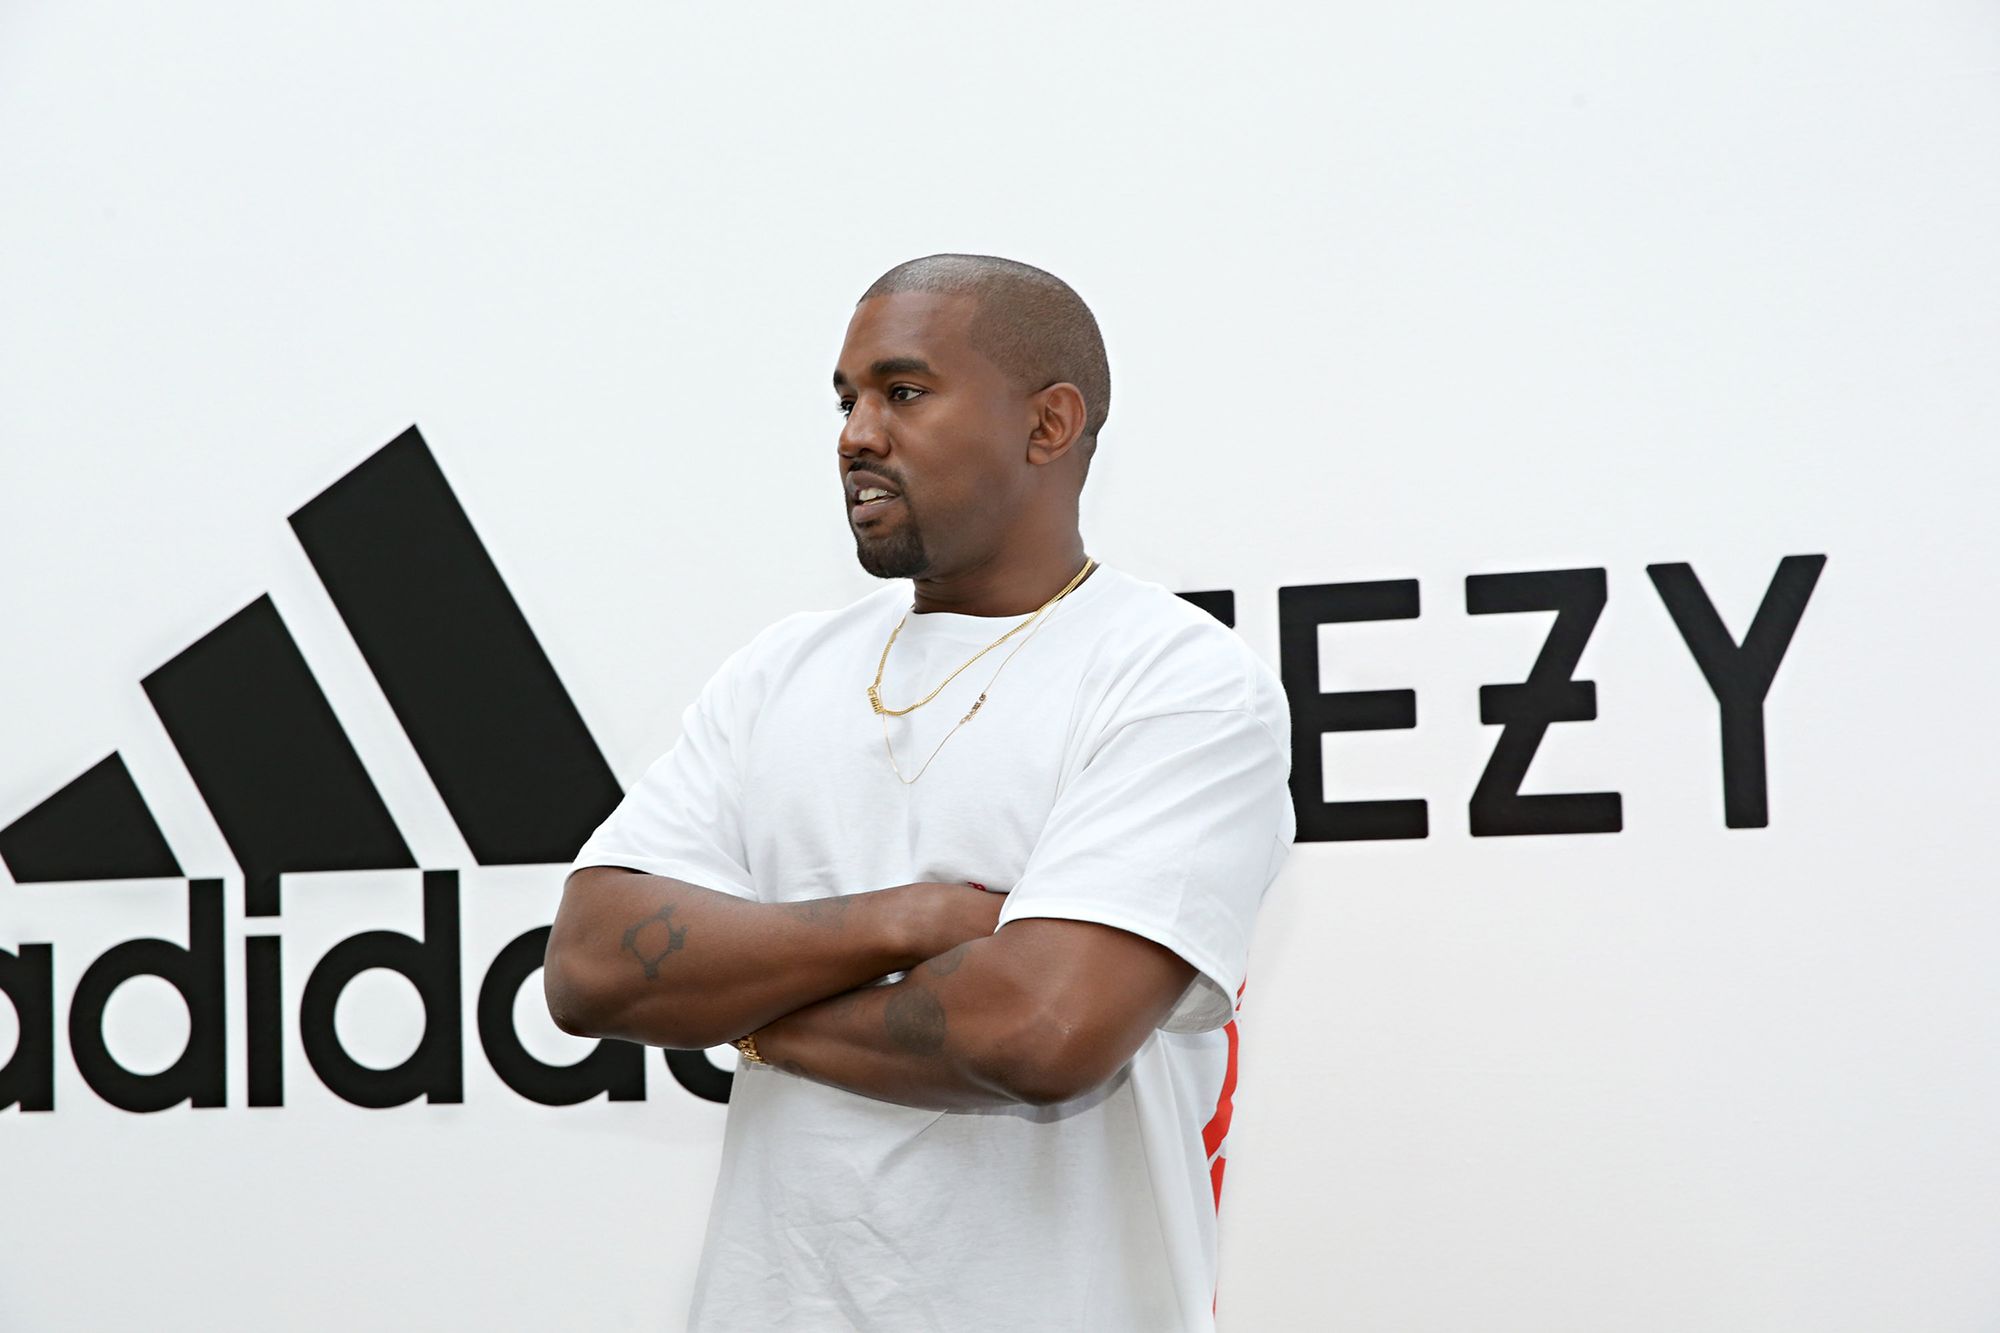 overseas float fertilizer Yeezy without the Ye? Who is new "sole" owner | CNN Business